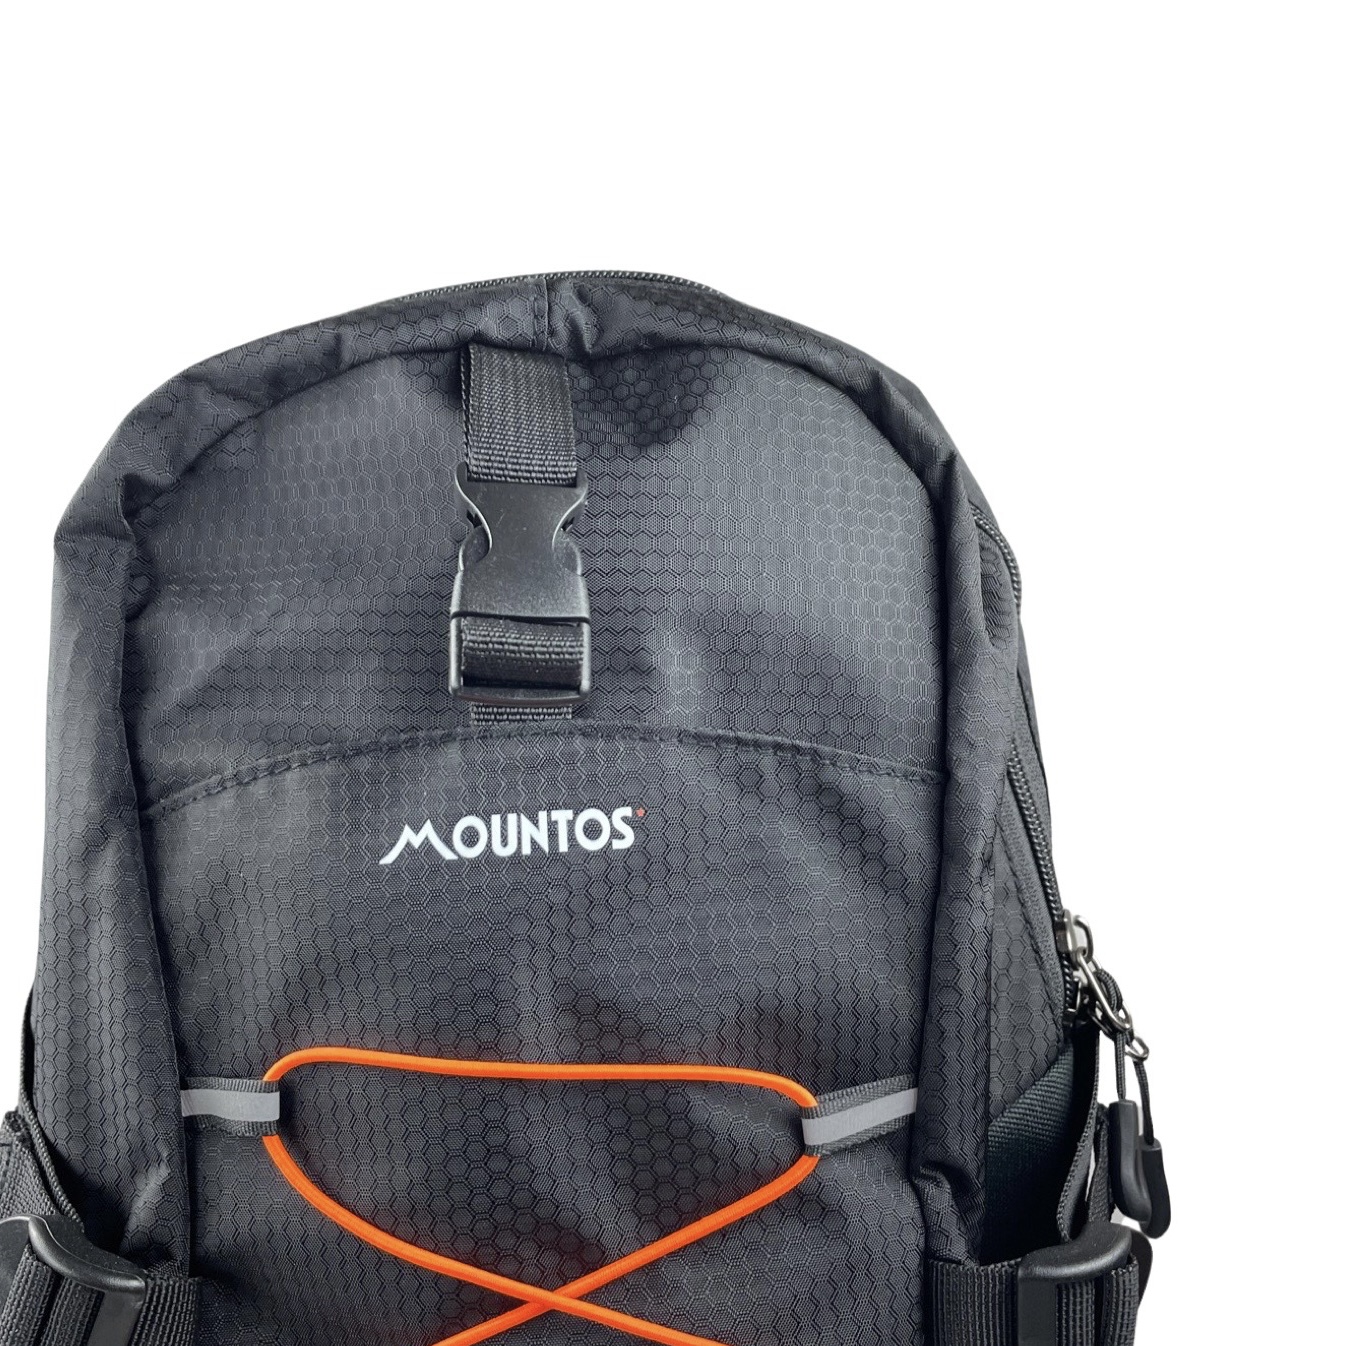 Mountos Daily Backpack Small Black